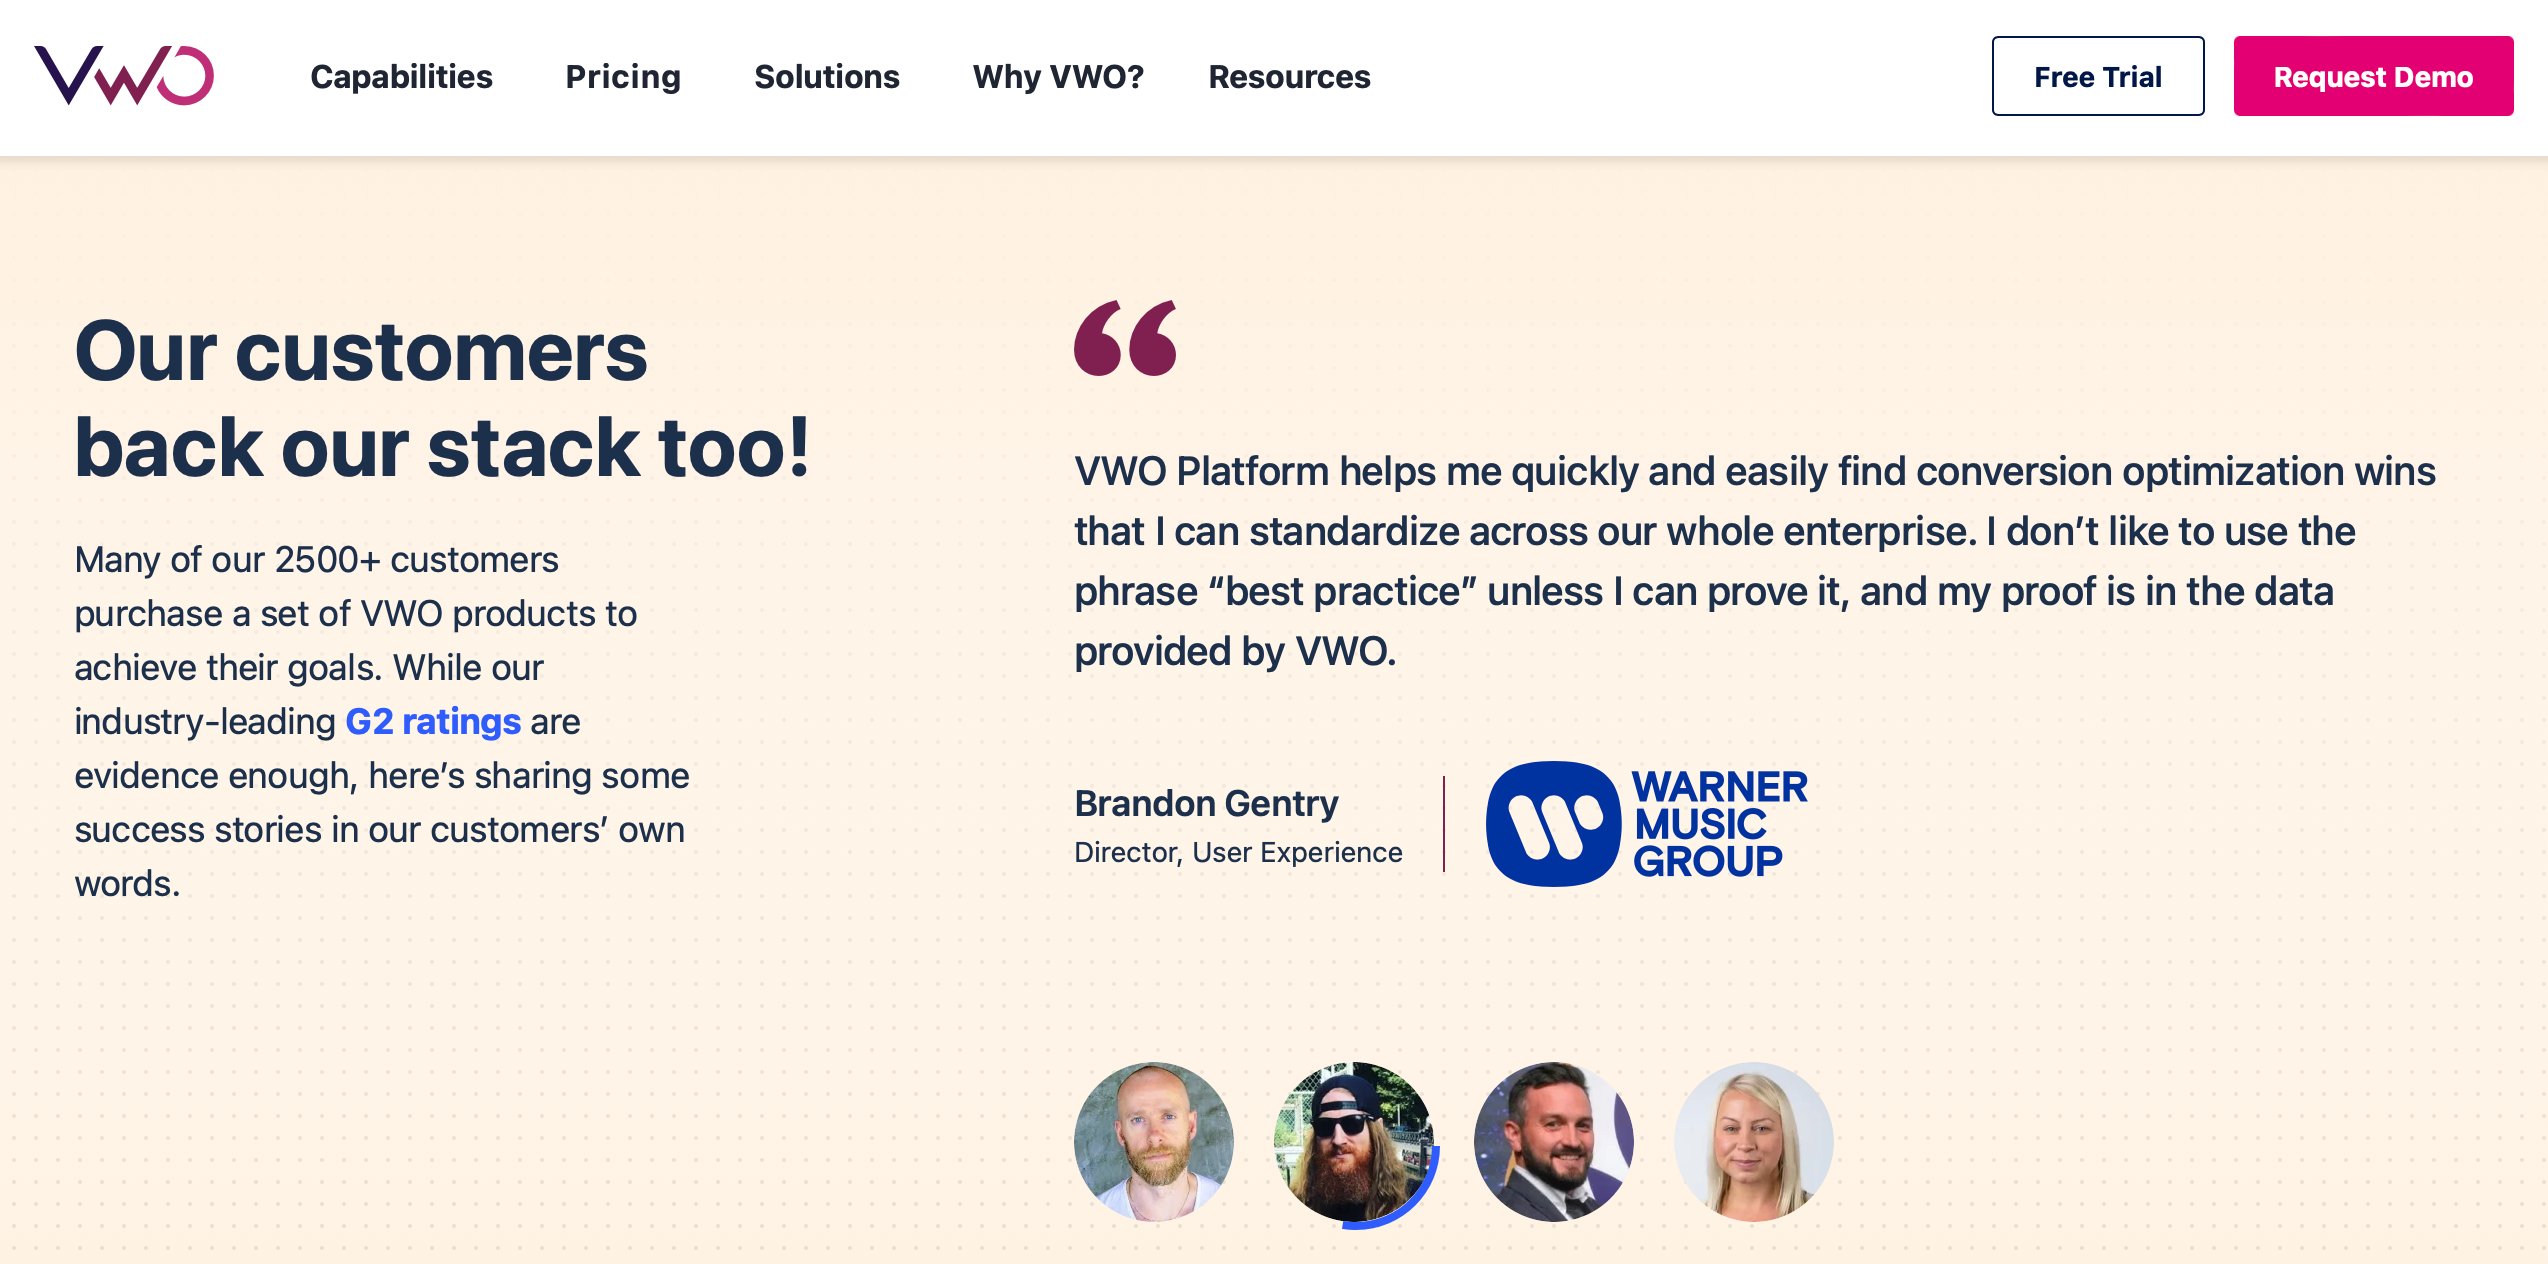 VWO as an example for incorporating social proof